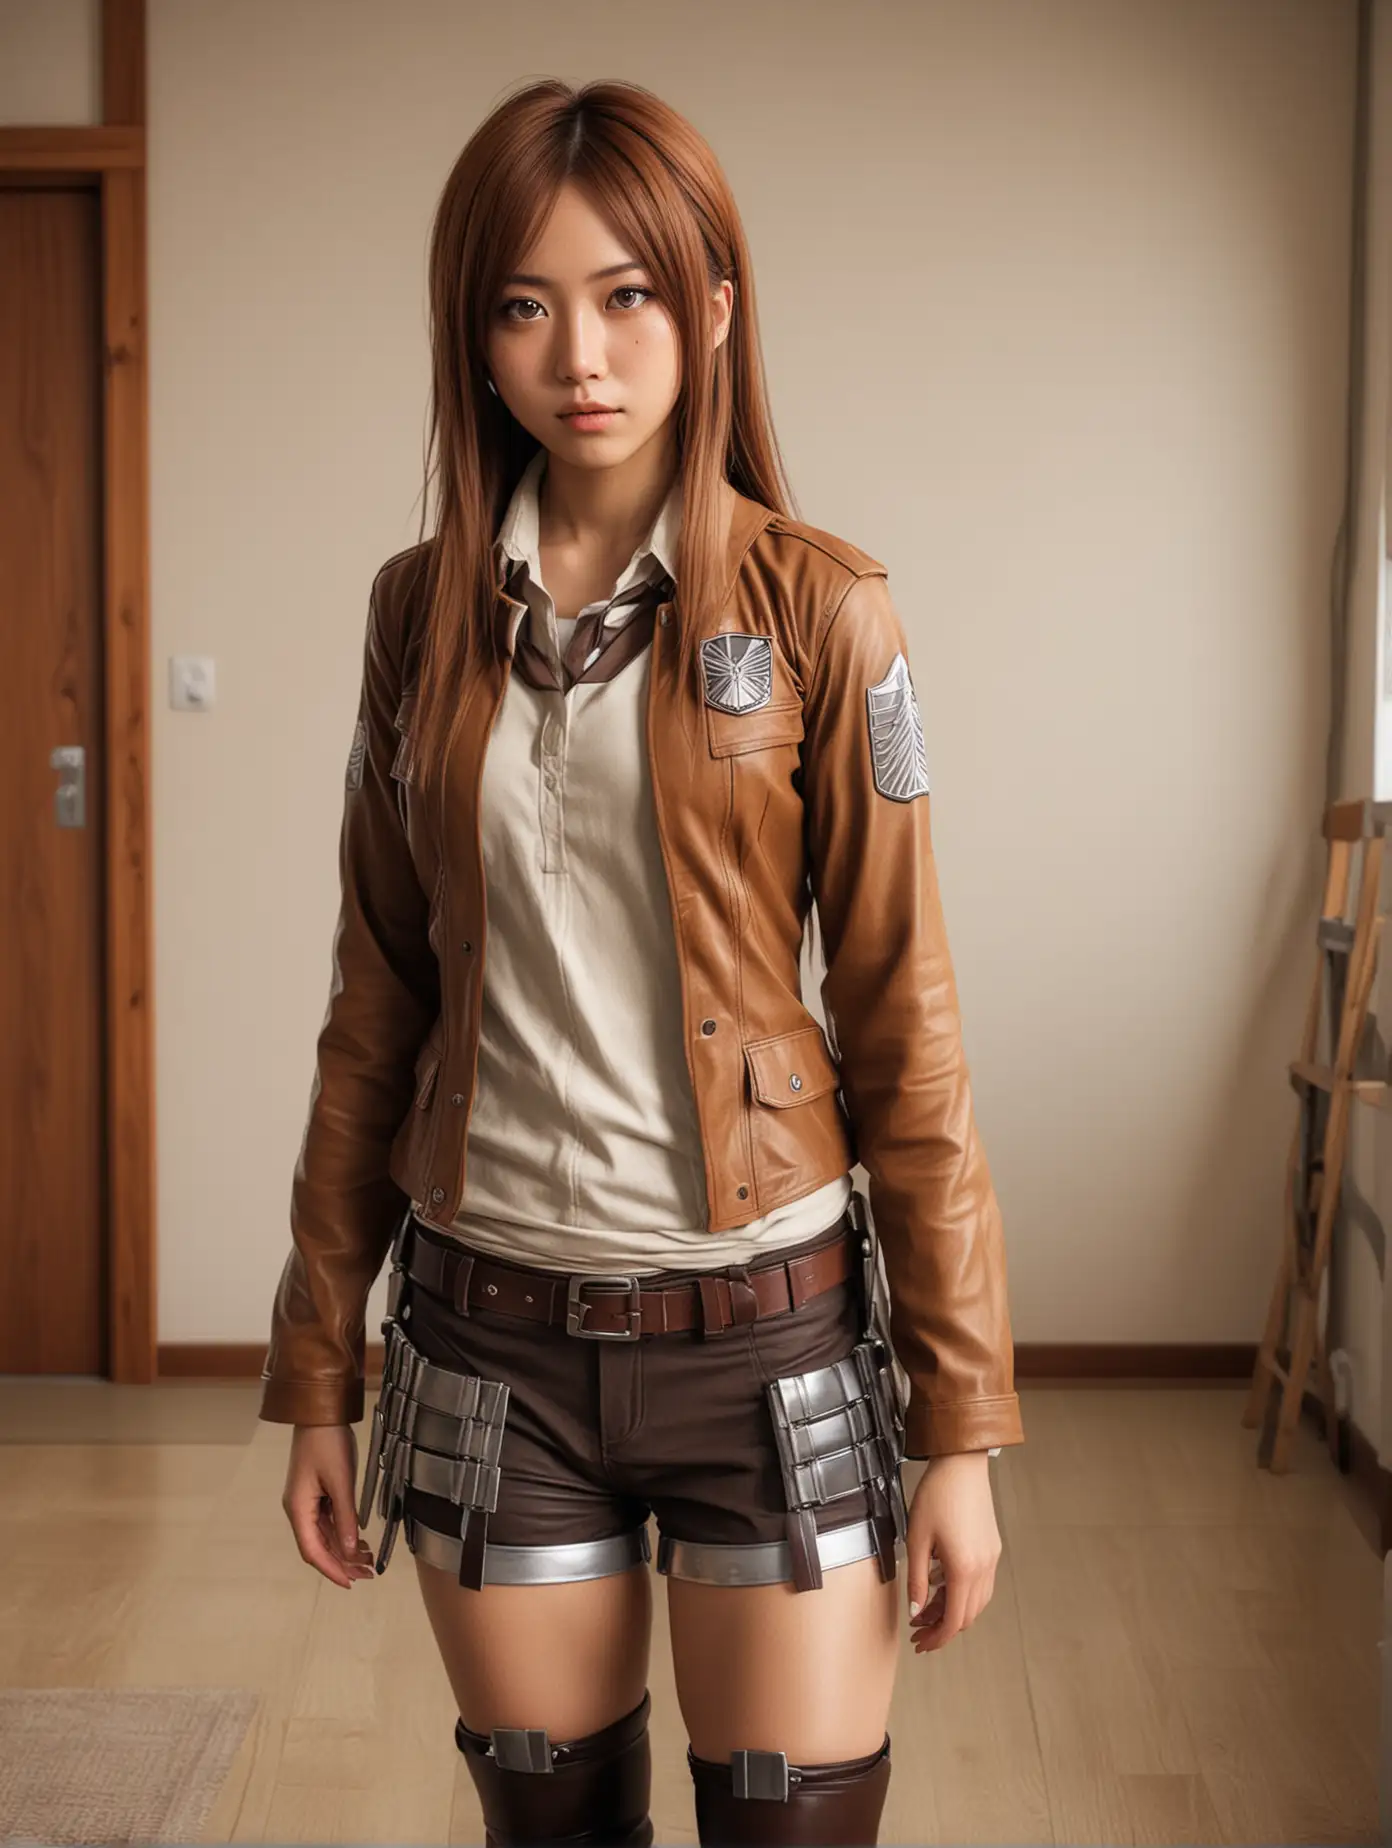 Fullbody Japanese girl with caramel-colored medium length hair, huge amber eyes, freckles, wearing attack on titan costume, in 
a room, hyperrealistic